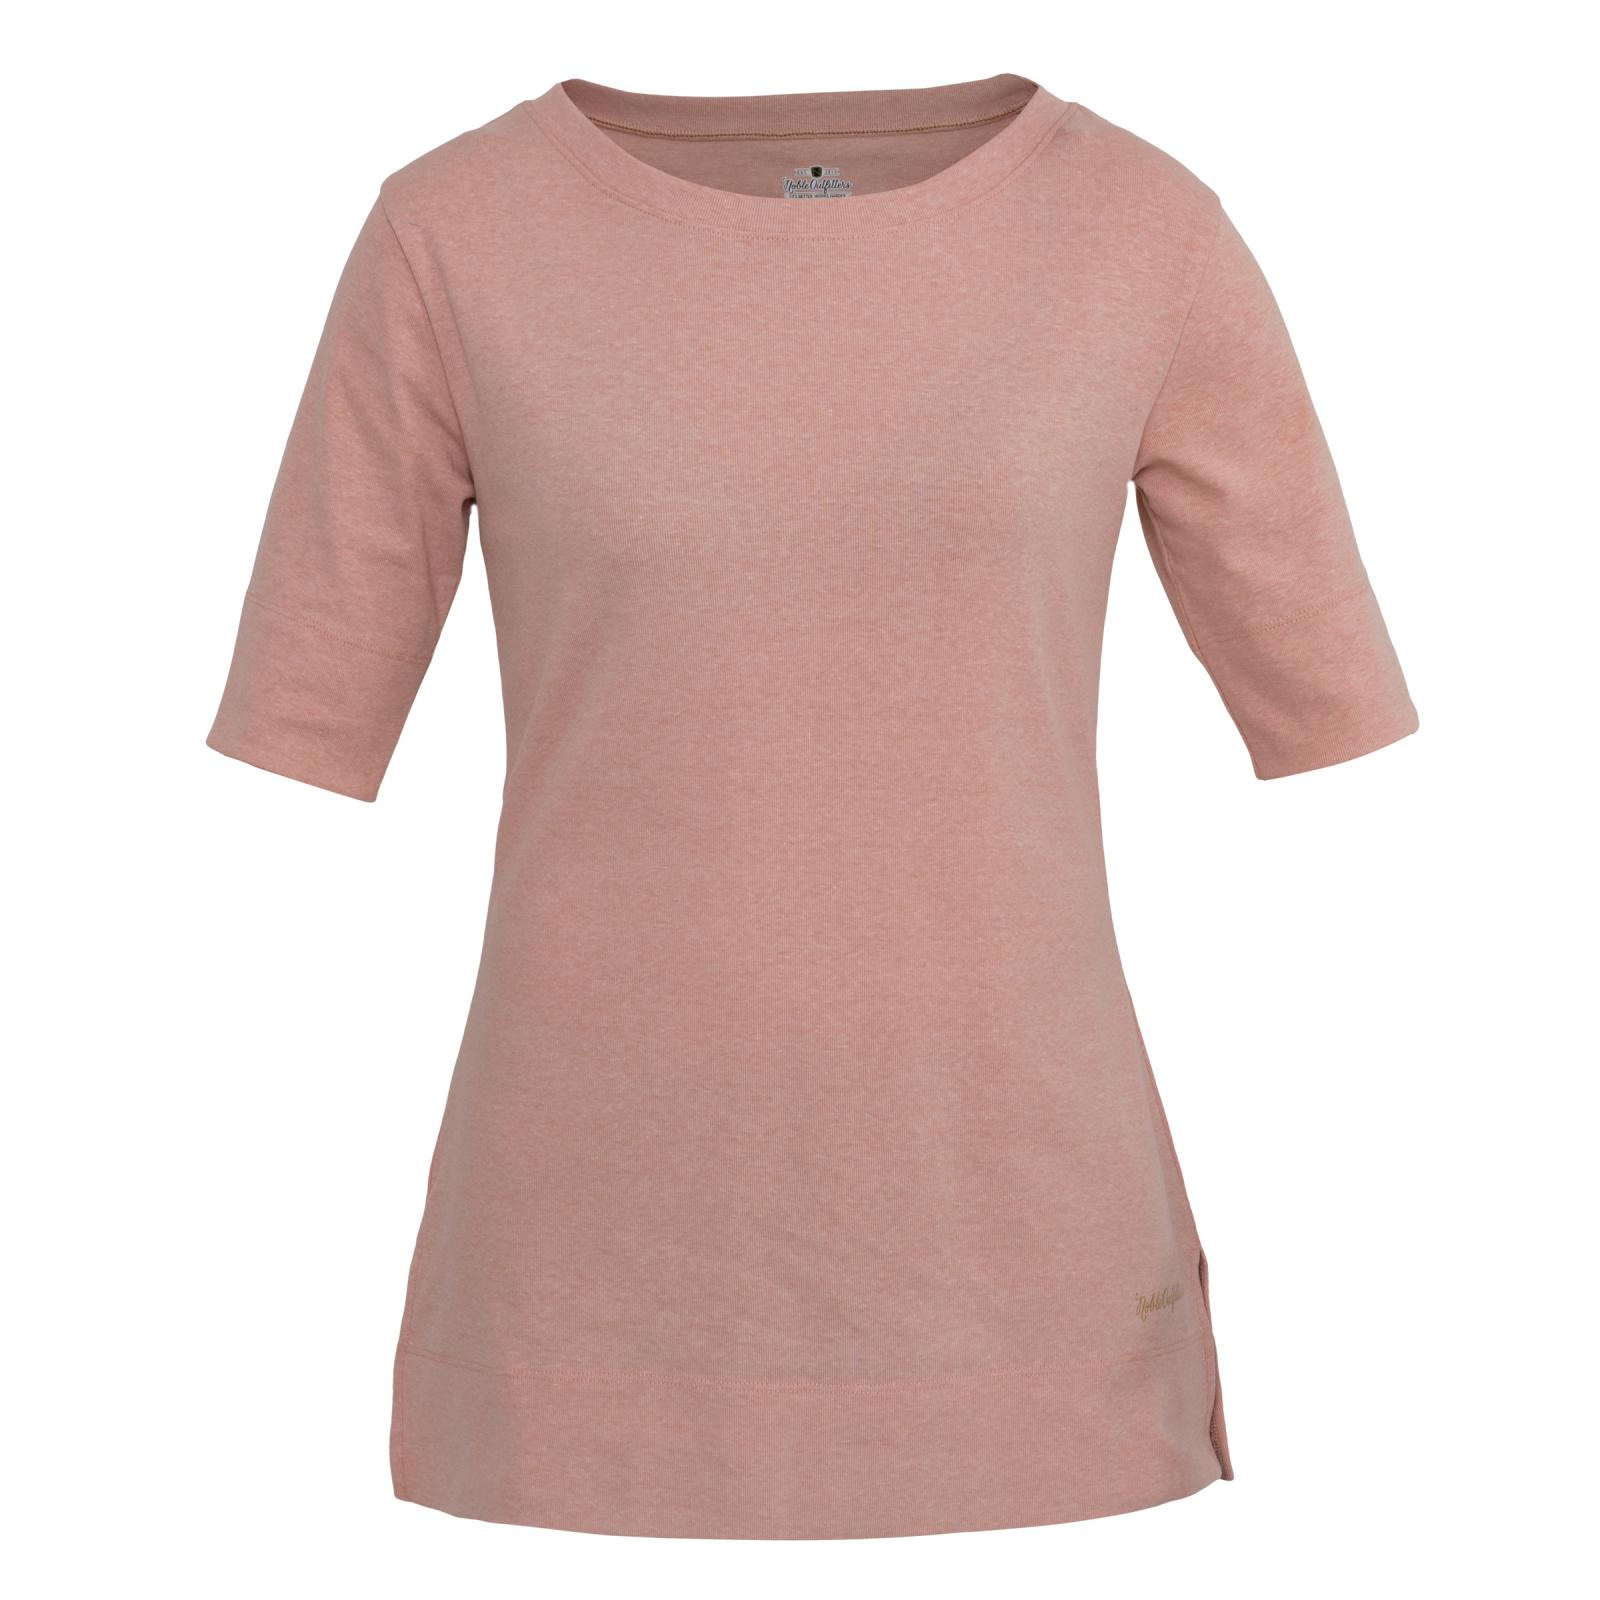 Noble Outfitters Women's Tug-Free Elbow Tee